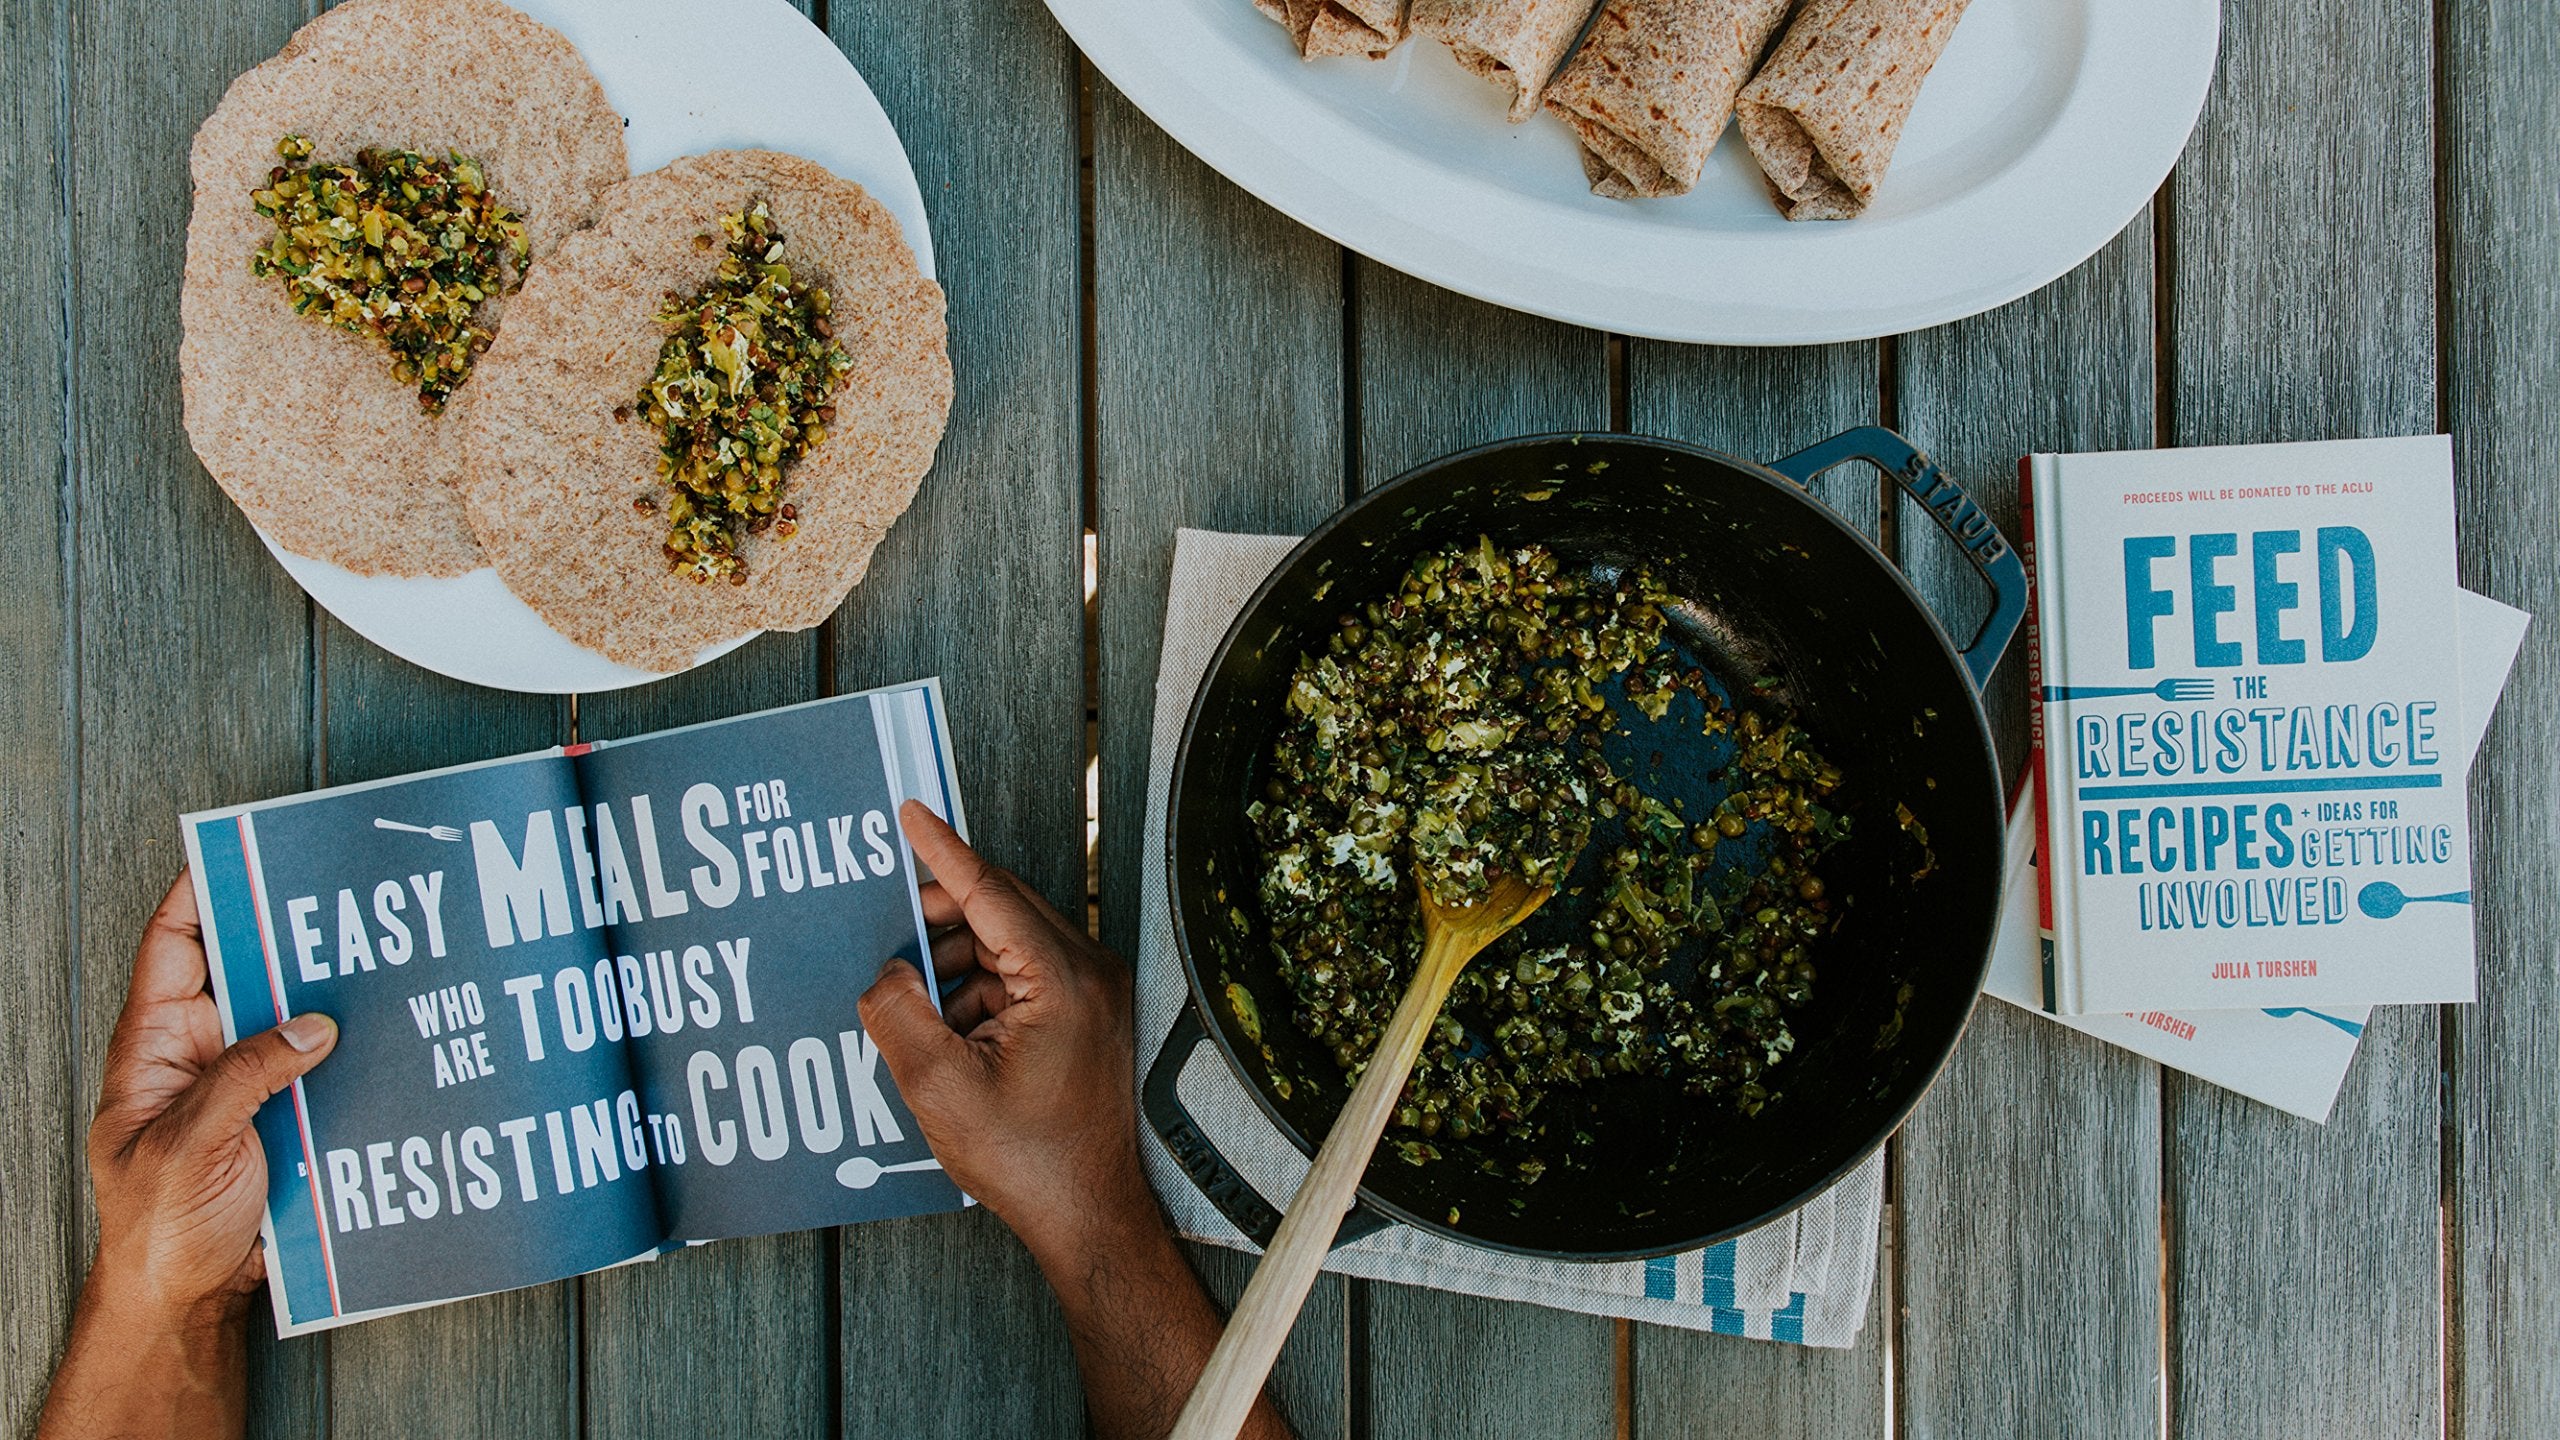 Feed the Resistance: Recipes + Ideas for Getting Involved (Julia Turshen Book, Cookbook for Activists)